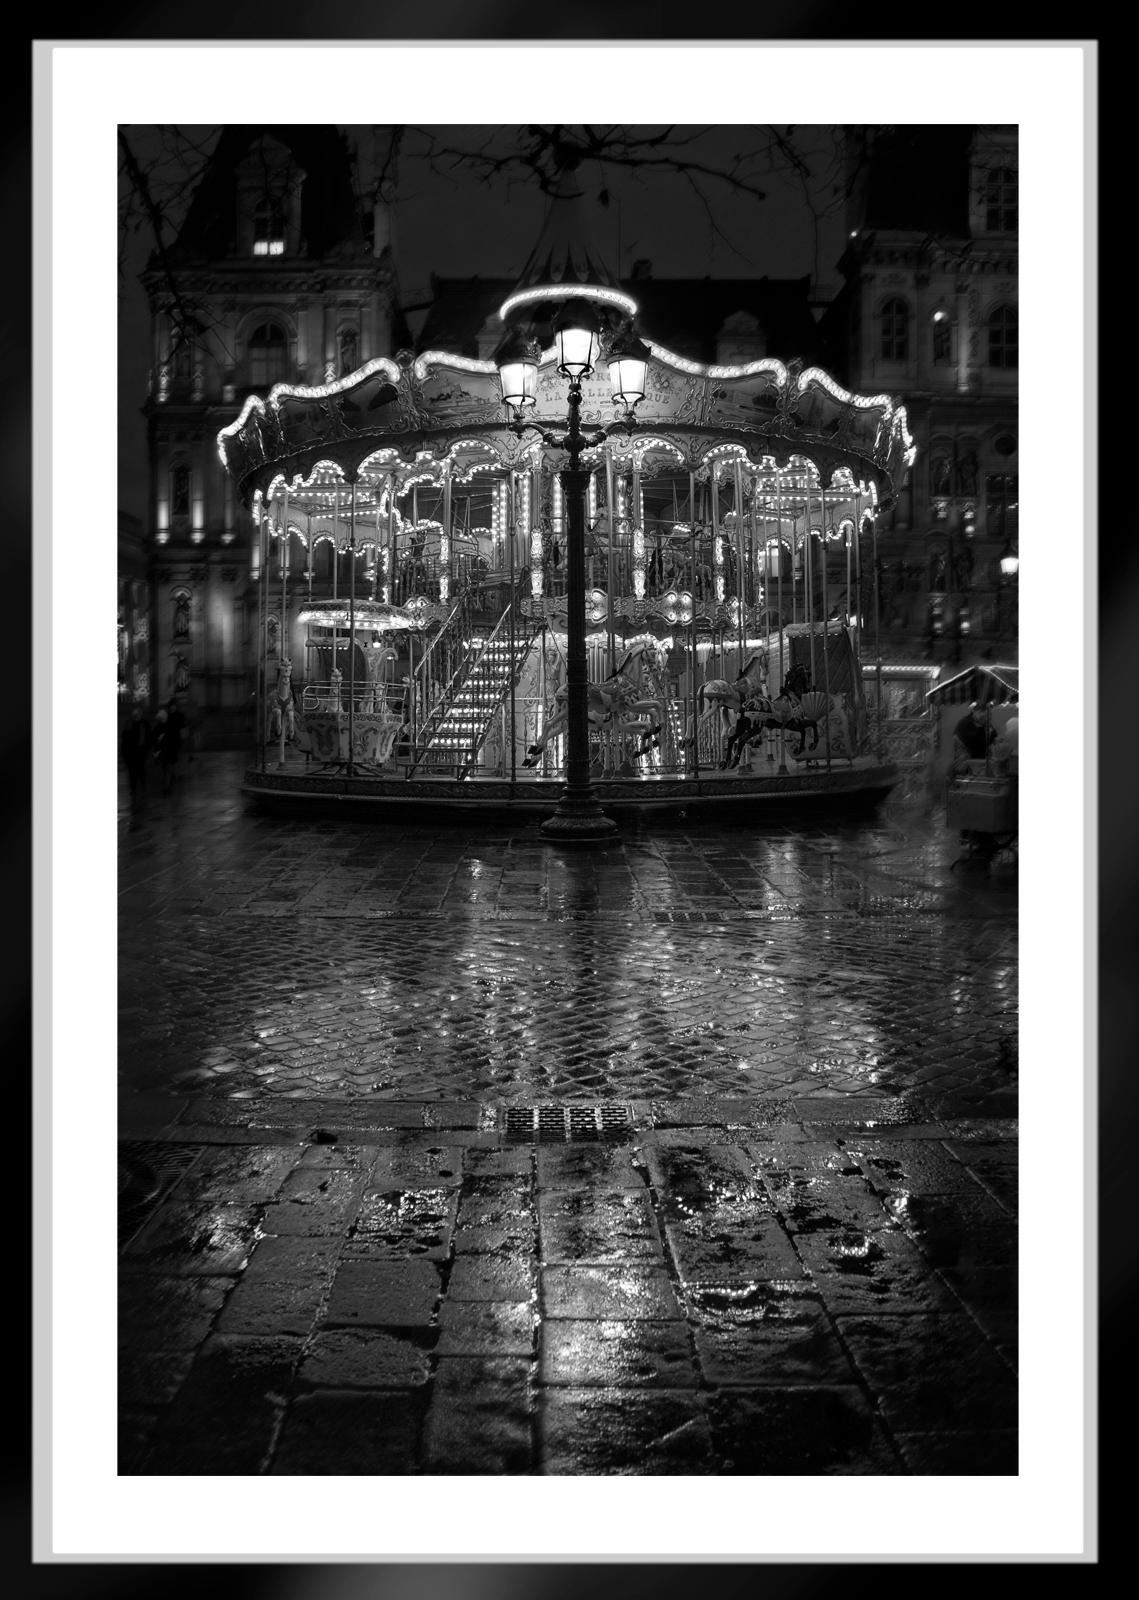 Carrousel- Signed limited edition still life print, Black white, Paris City - Contemporary Photograph by Ian Sanderson